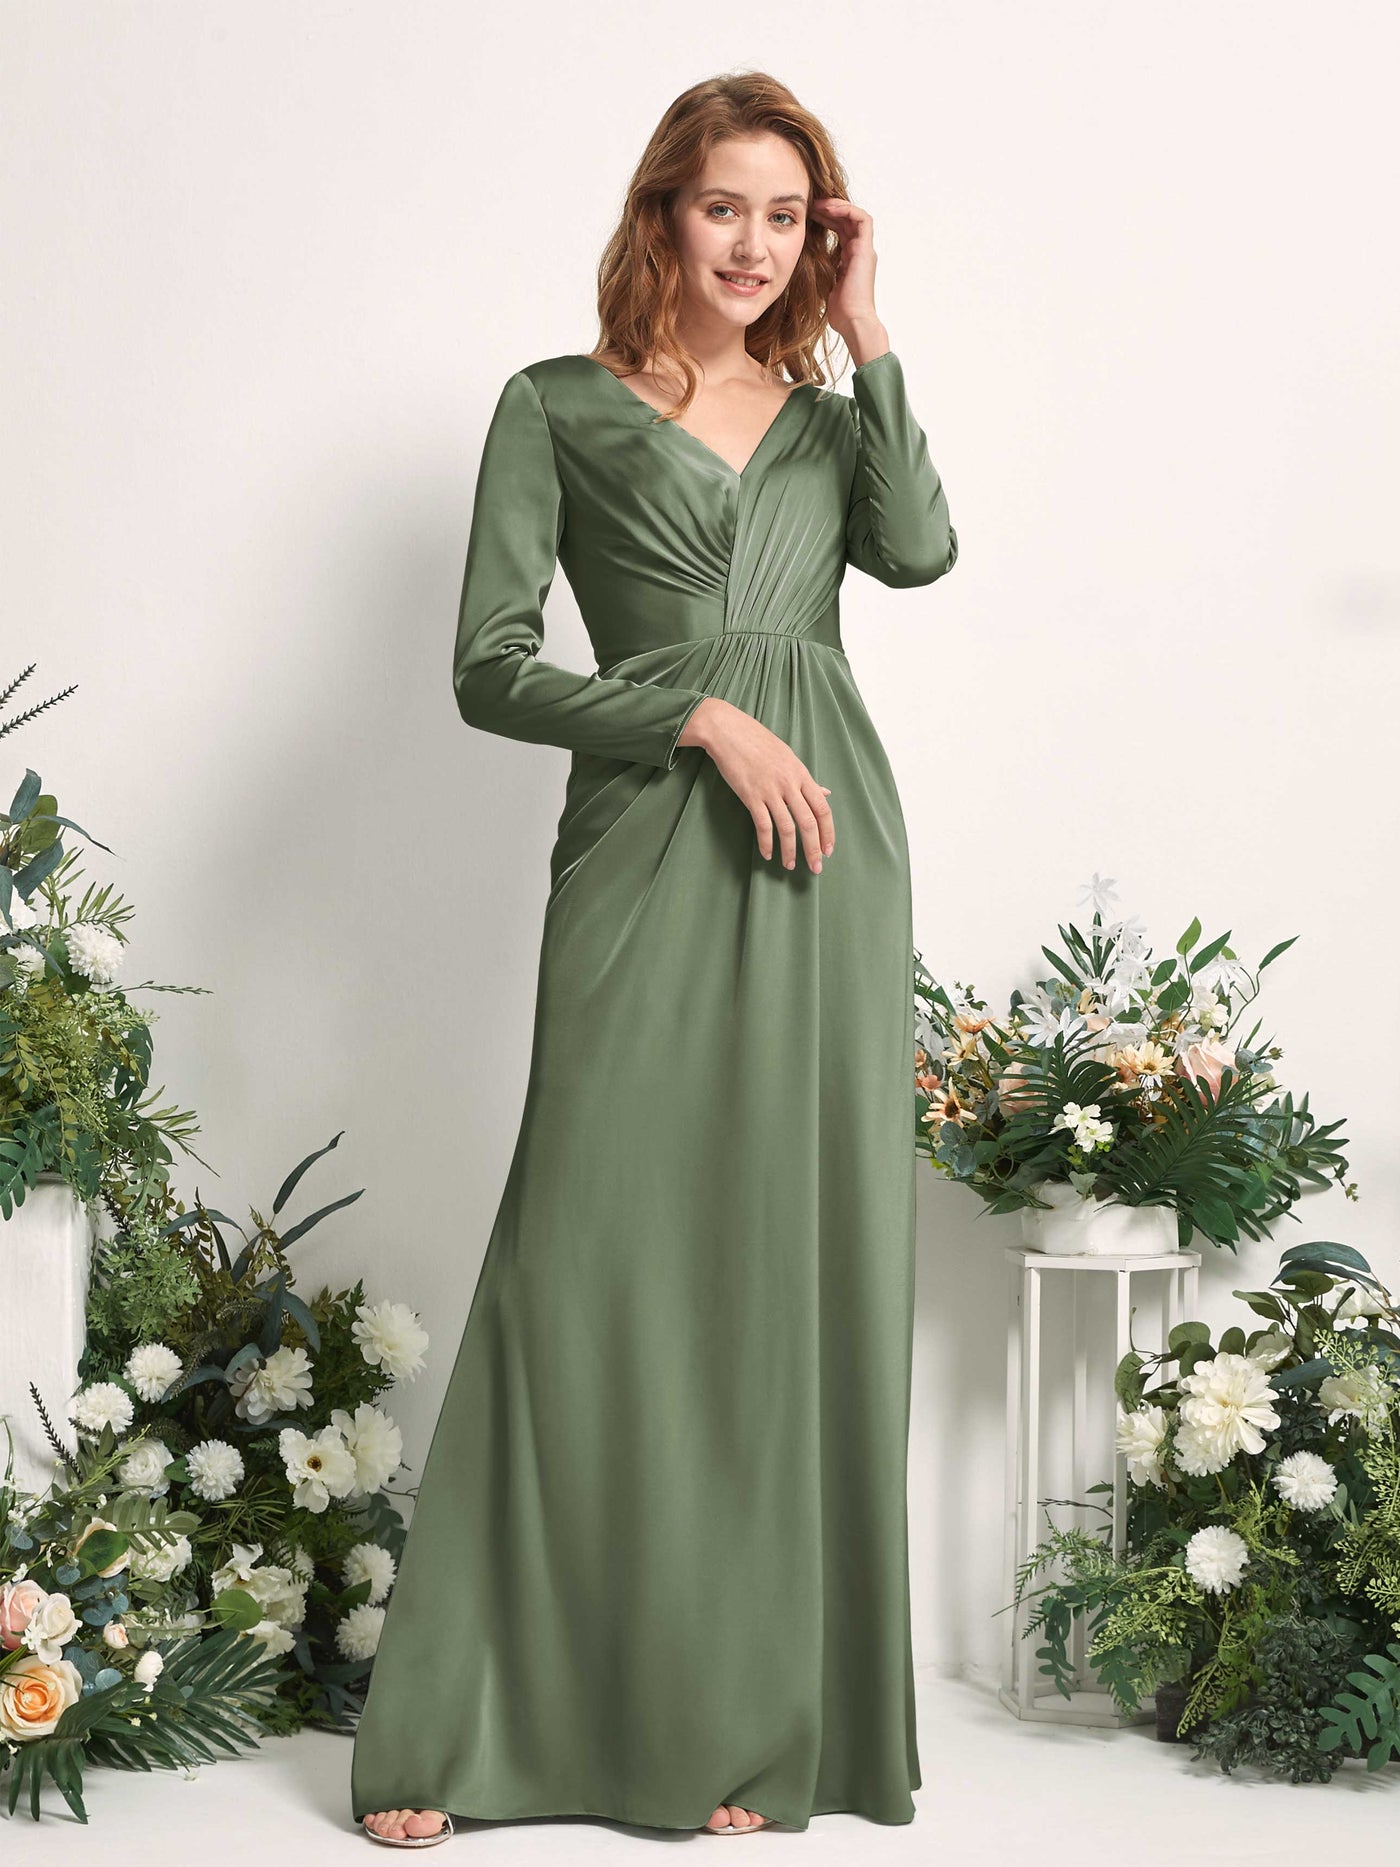 Green Olive Bridesmaid Dresses Bridesmaid Dress A-line Satin V-neck Full Length Long Sleeves Wedding Party Dress (80225870)#color_green-olive